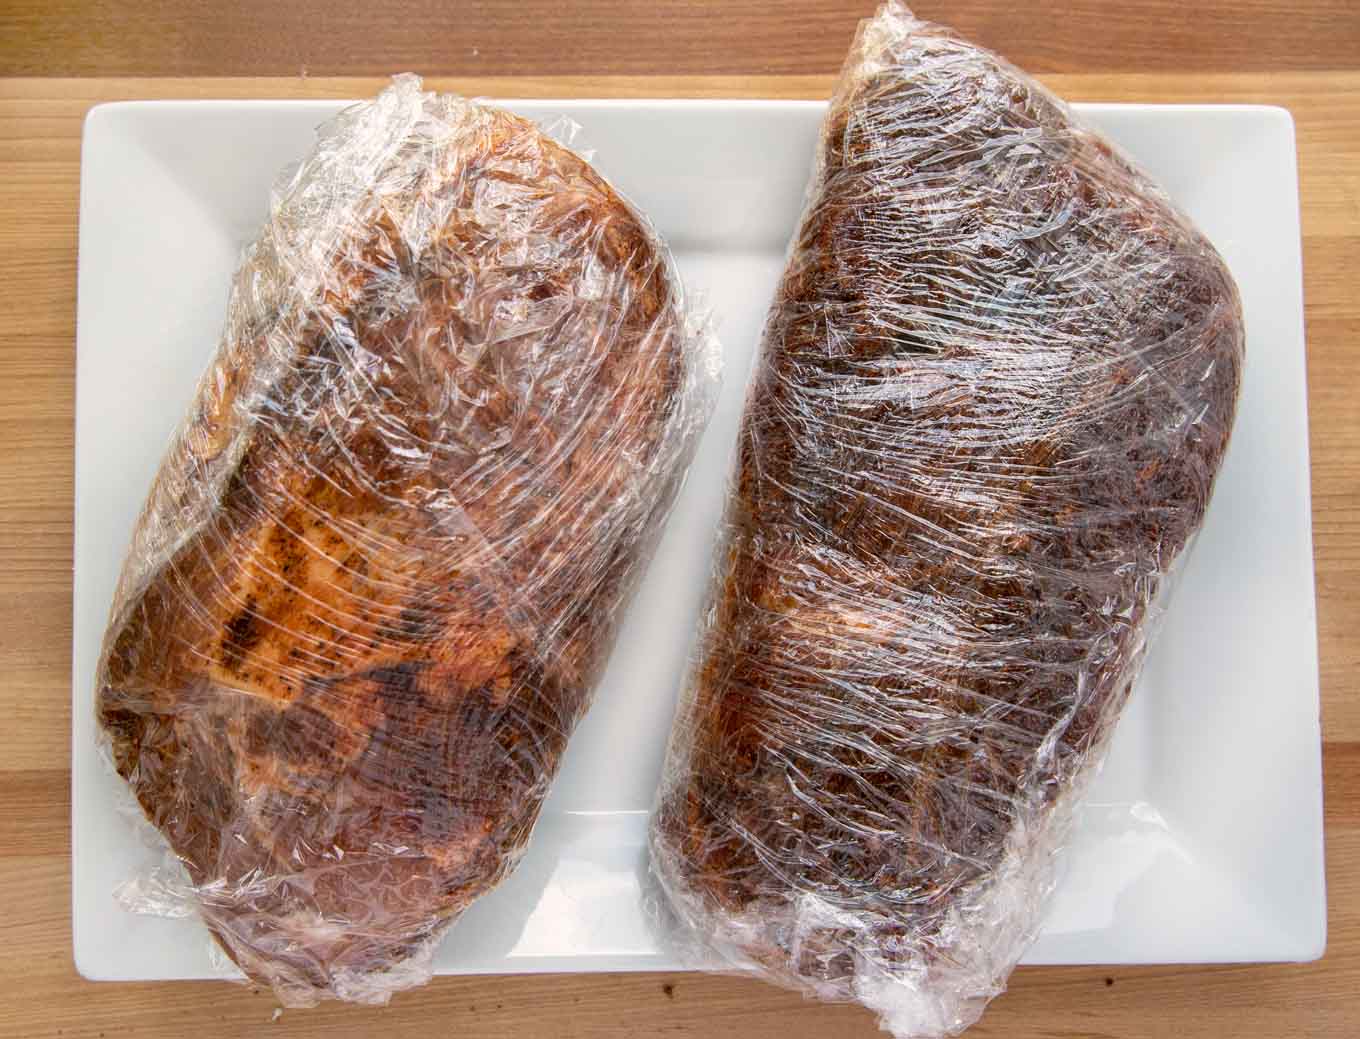 pork roasts coated with a dry rub and double wrapped in plastic wrap sitting on a white platter